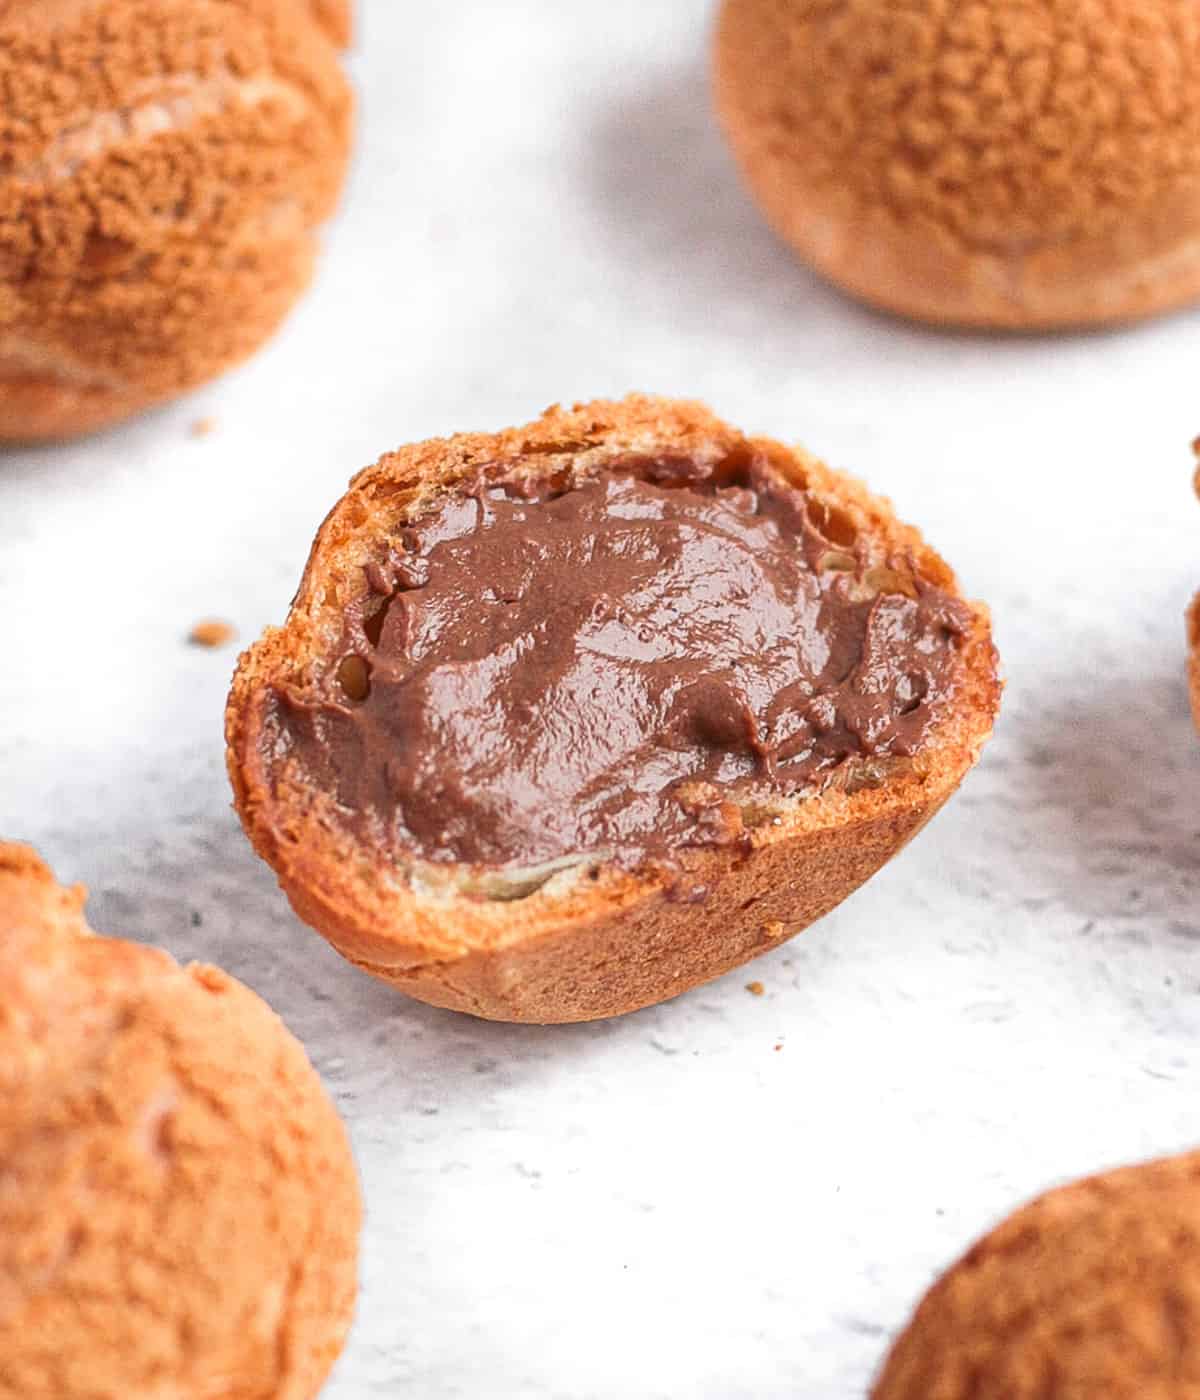 Choux sliced in half and filled with chocolate pastry cream.